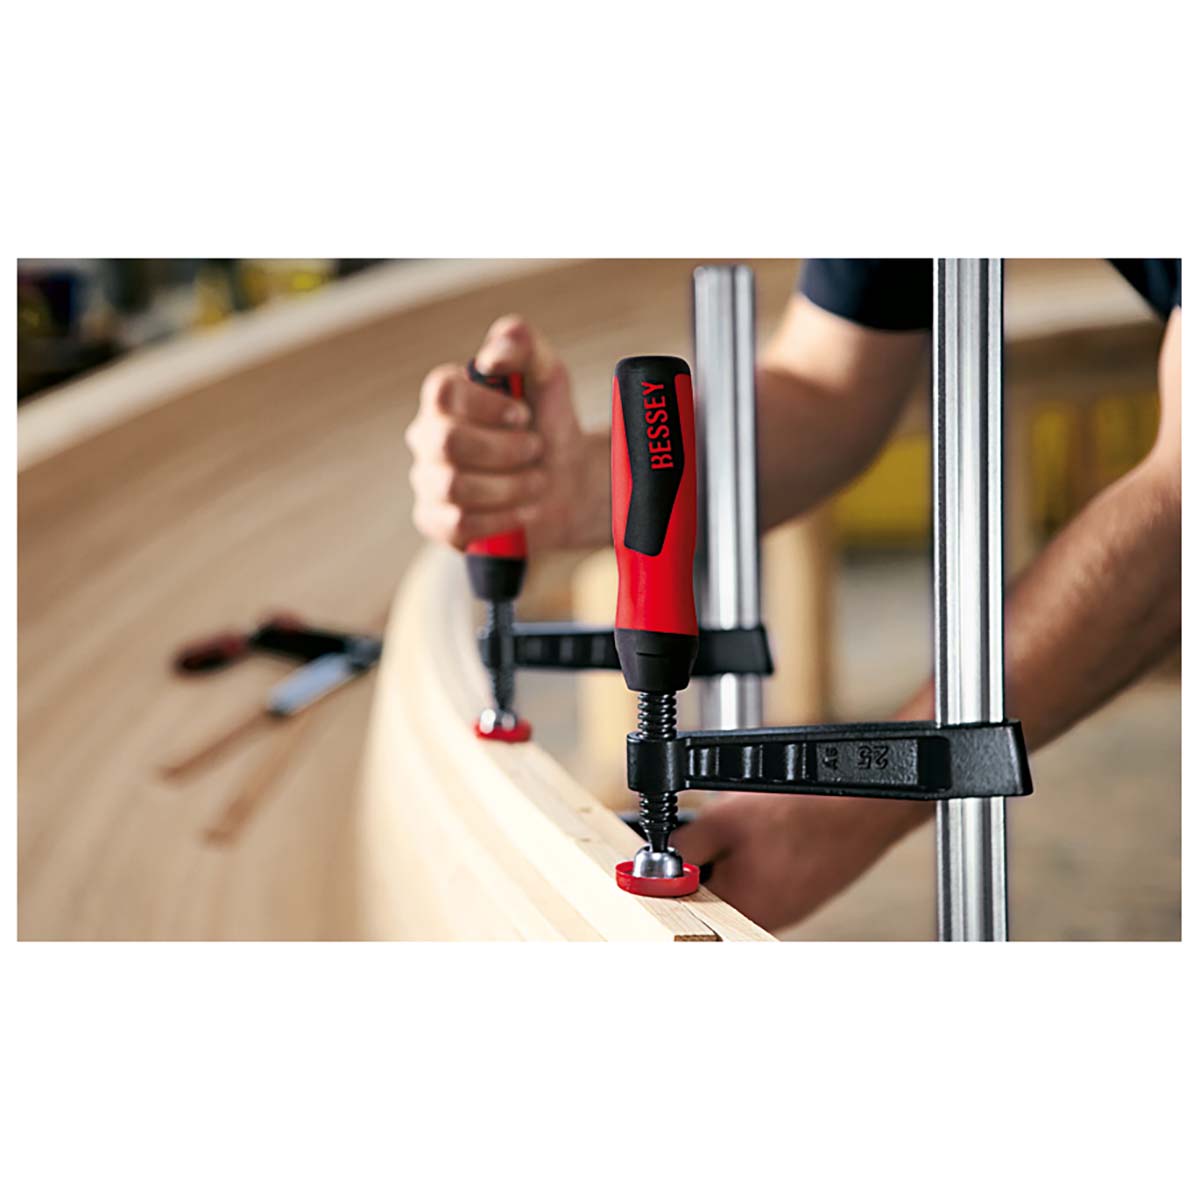 Bessey TG12-2K - Tightening screw with two-component handle Bessey TG 120/60